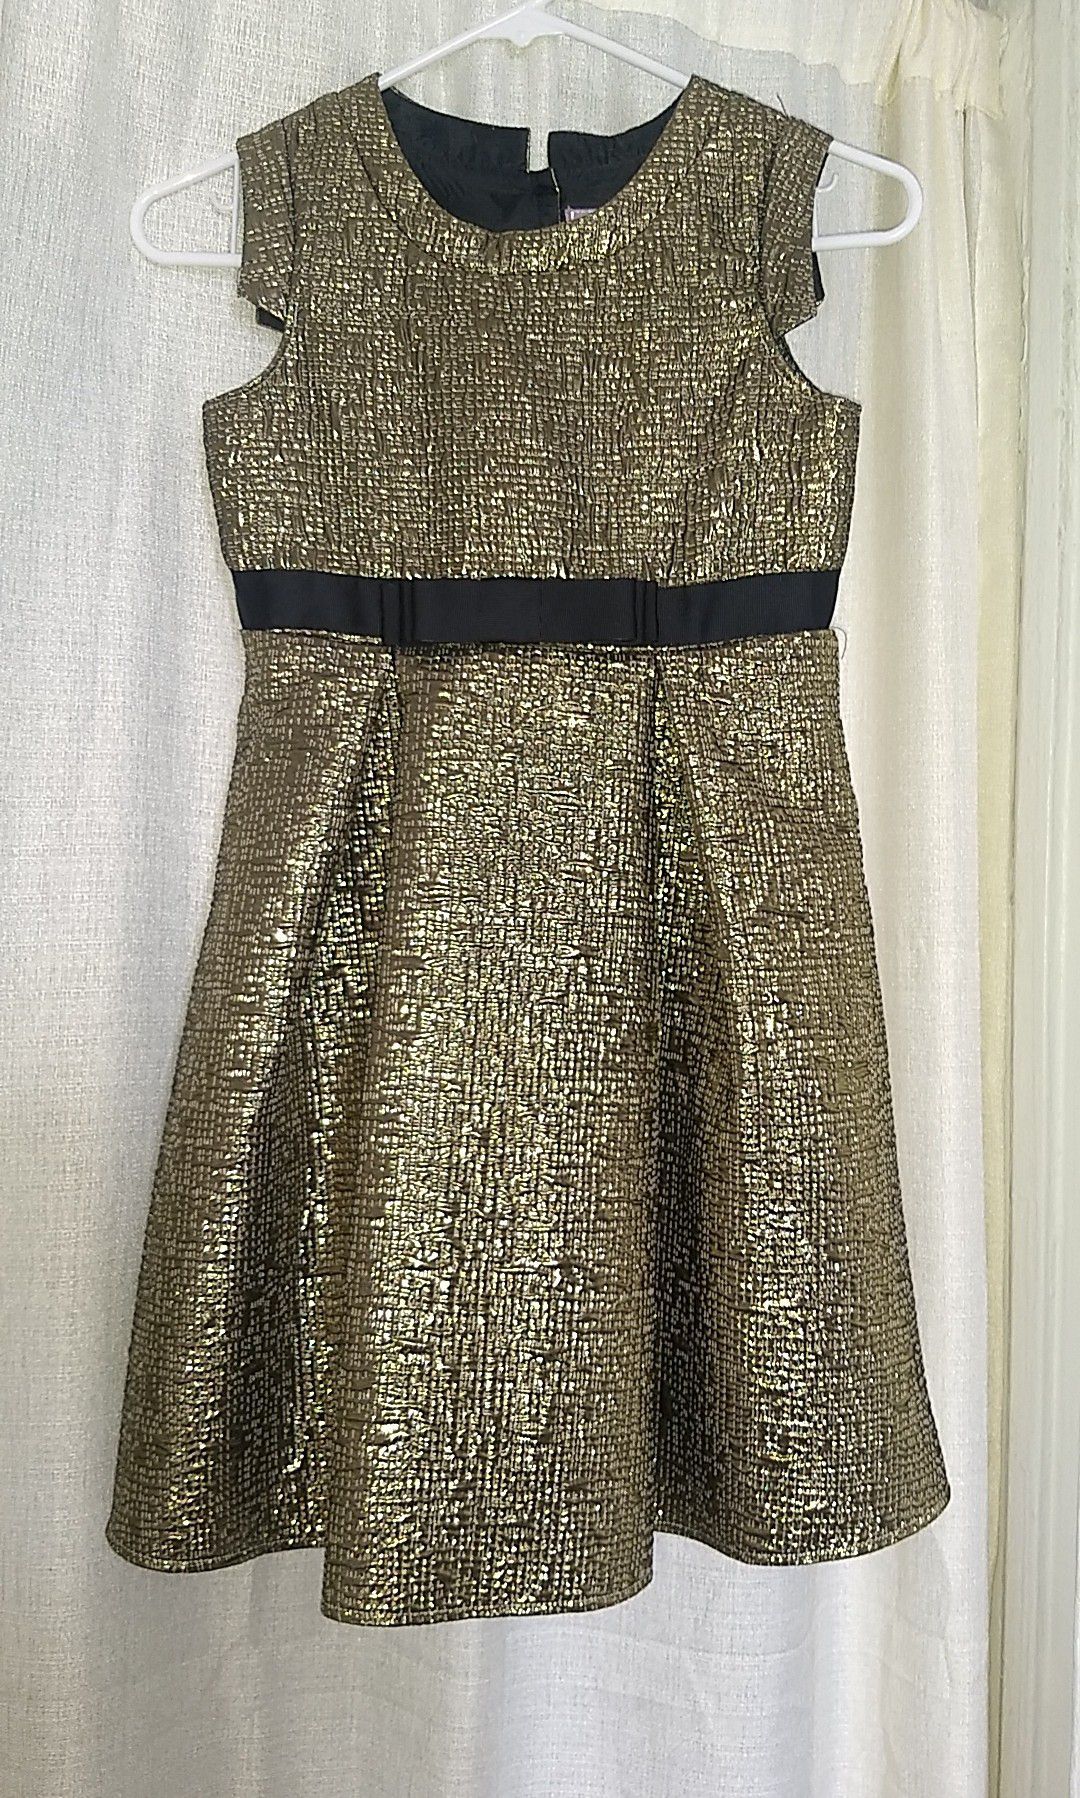 Girl Gold and Black Dress